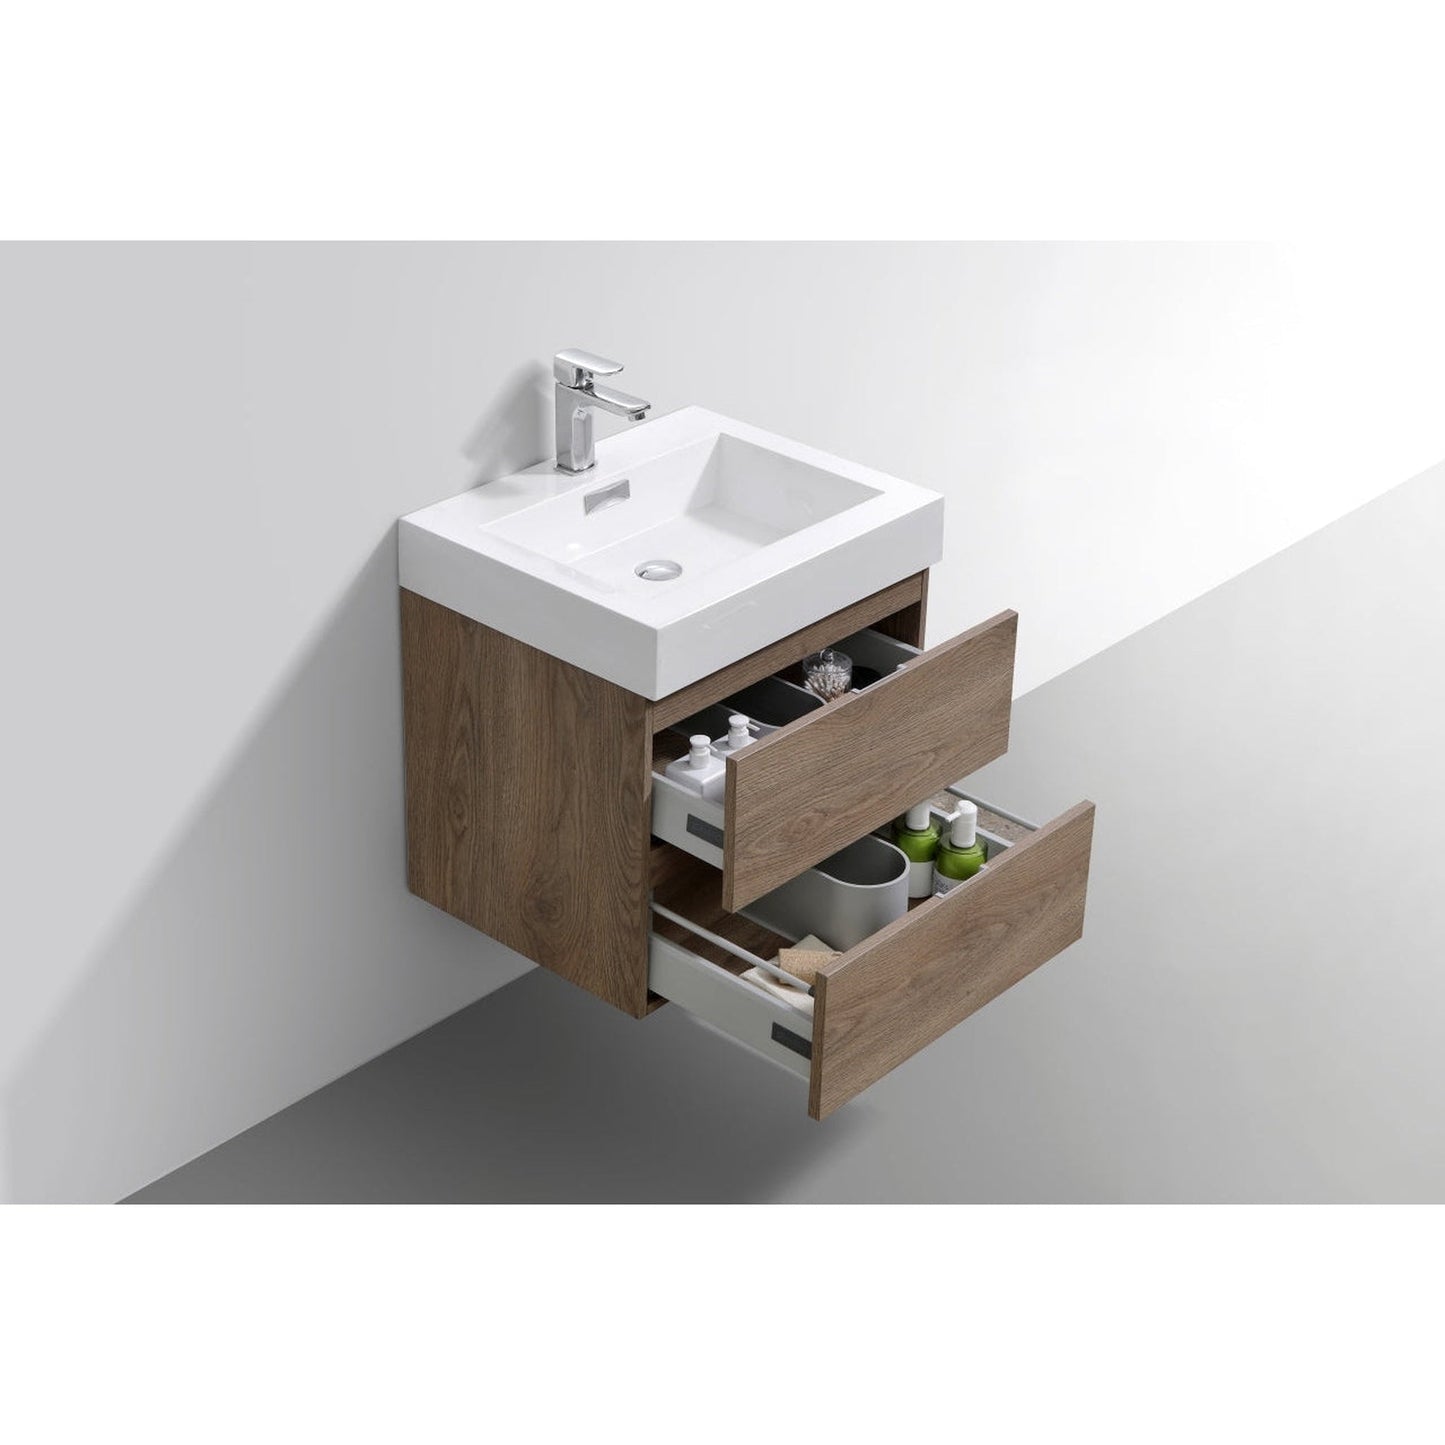 KubeBath Bliss 24" Butternut Wall-Mounted Modern Bathroom Vanity With Single Integrated Acrylic Sink With Overflow and 24" Butternut Framed Mirror With Shelf